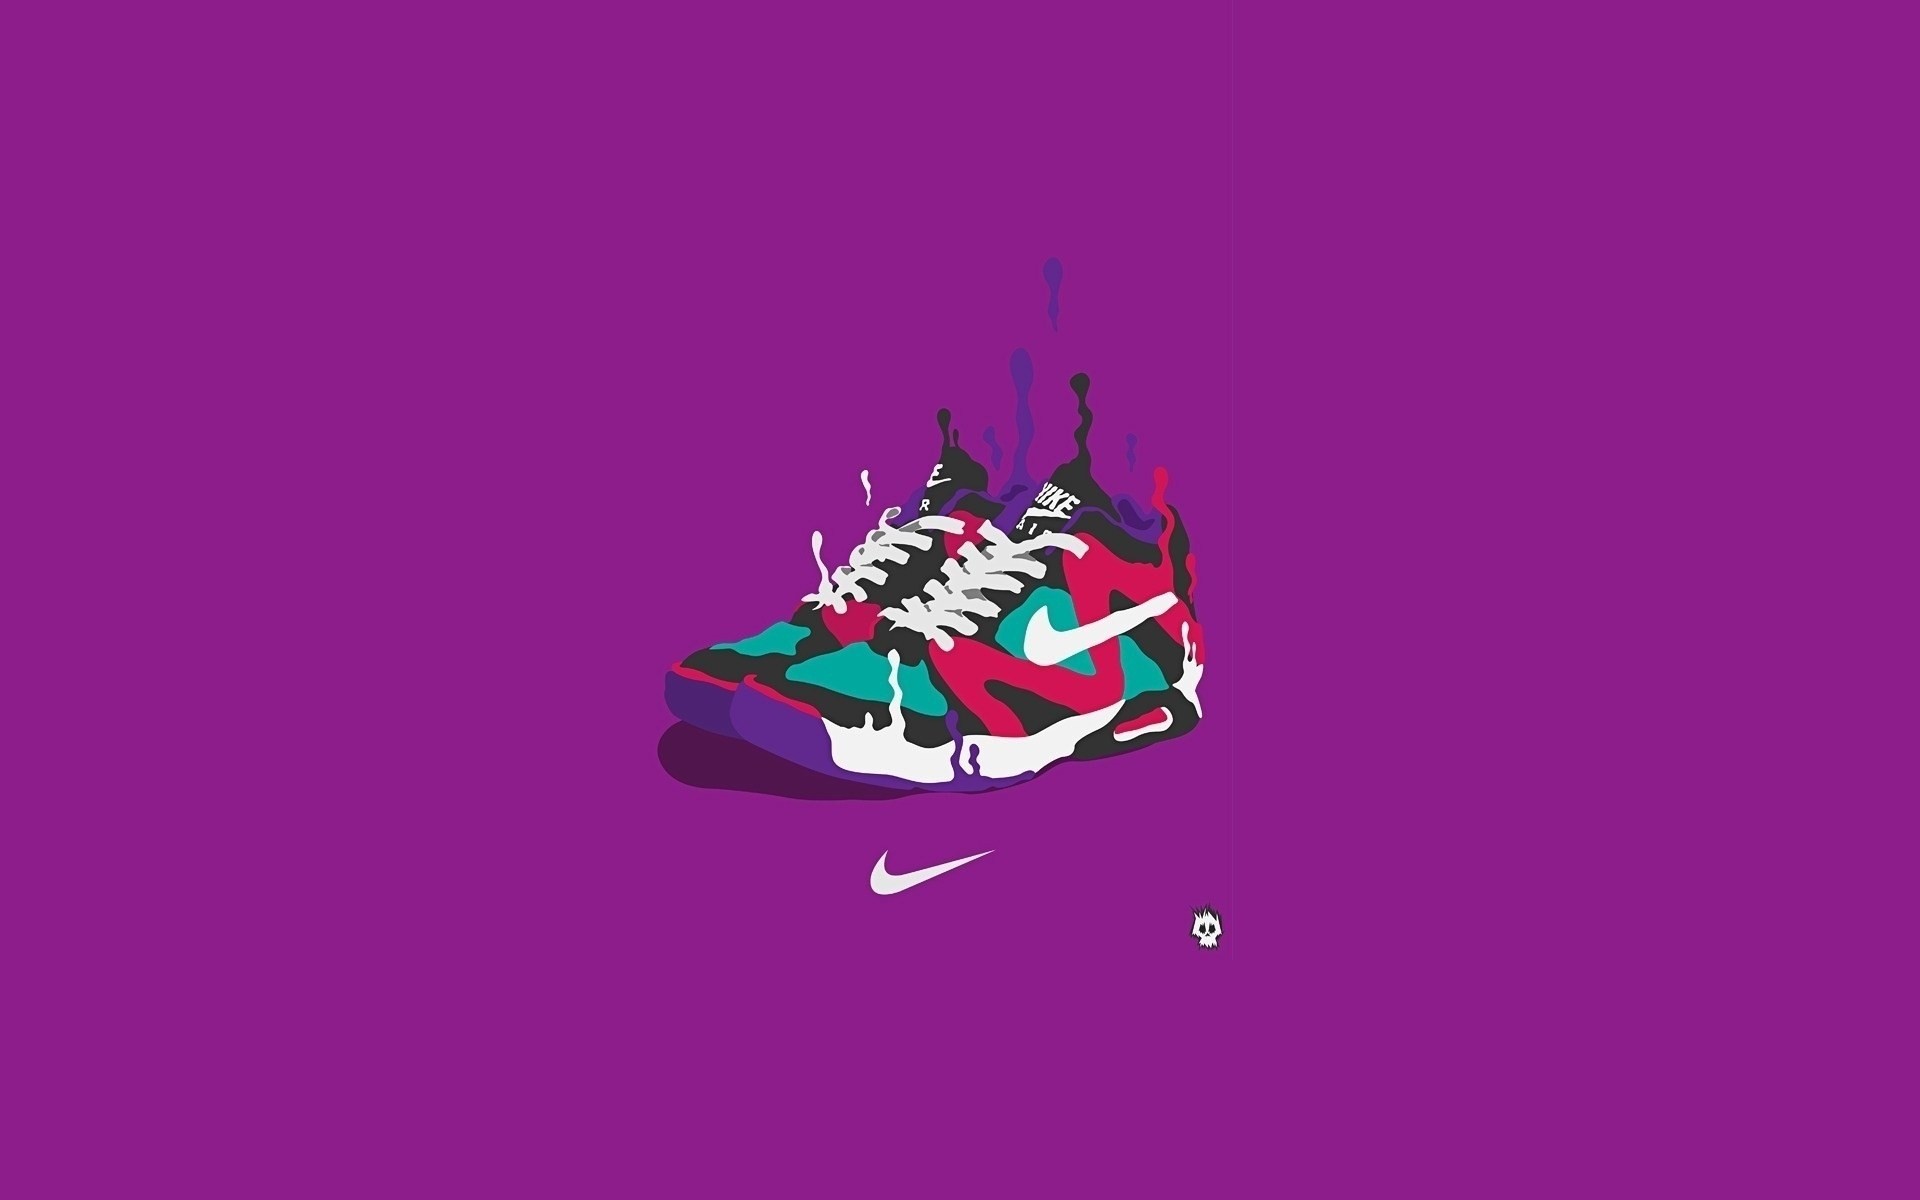 1920x1200 Find out: Nike Basketball Shoes Art wallpaper on http://hdpicorner.com